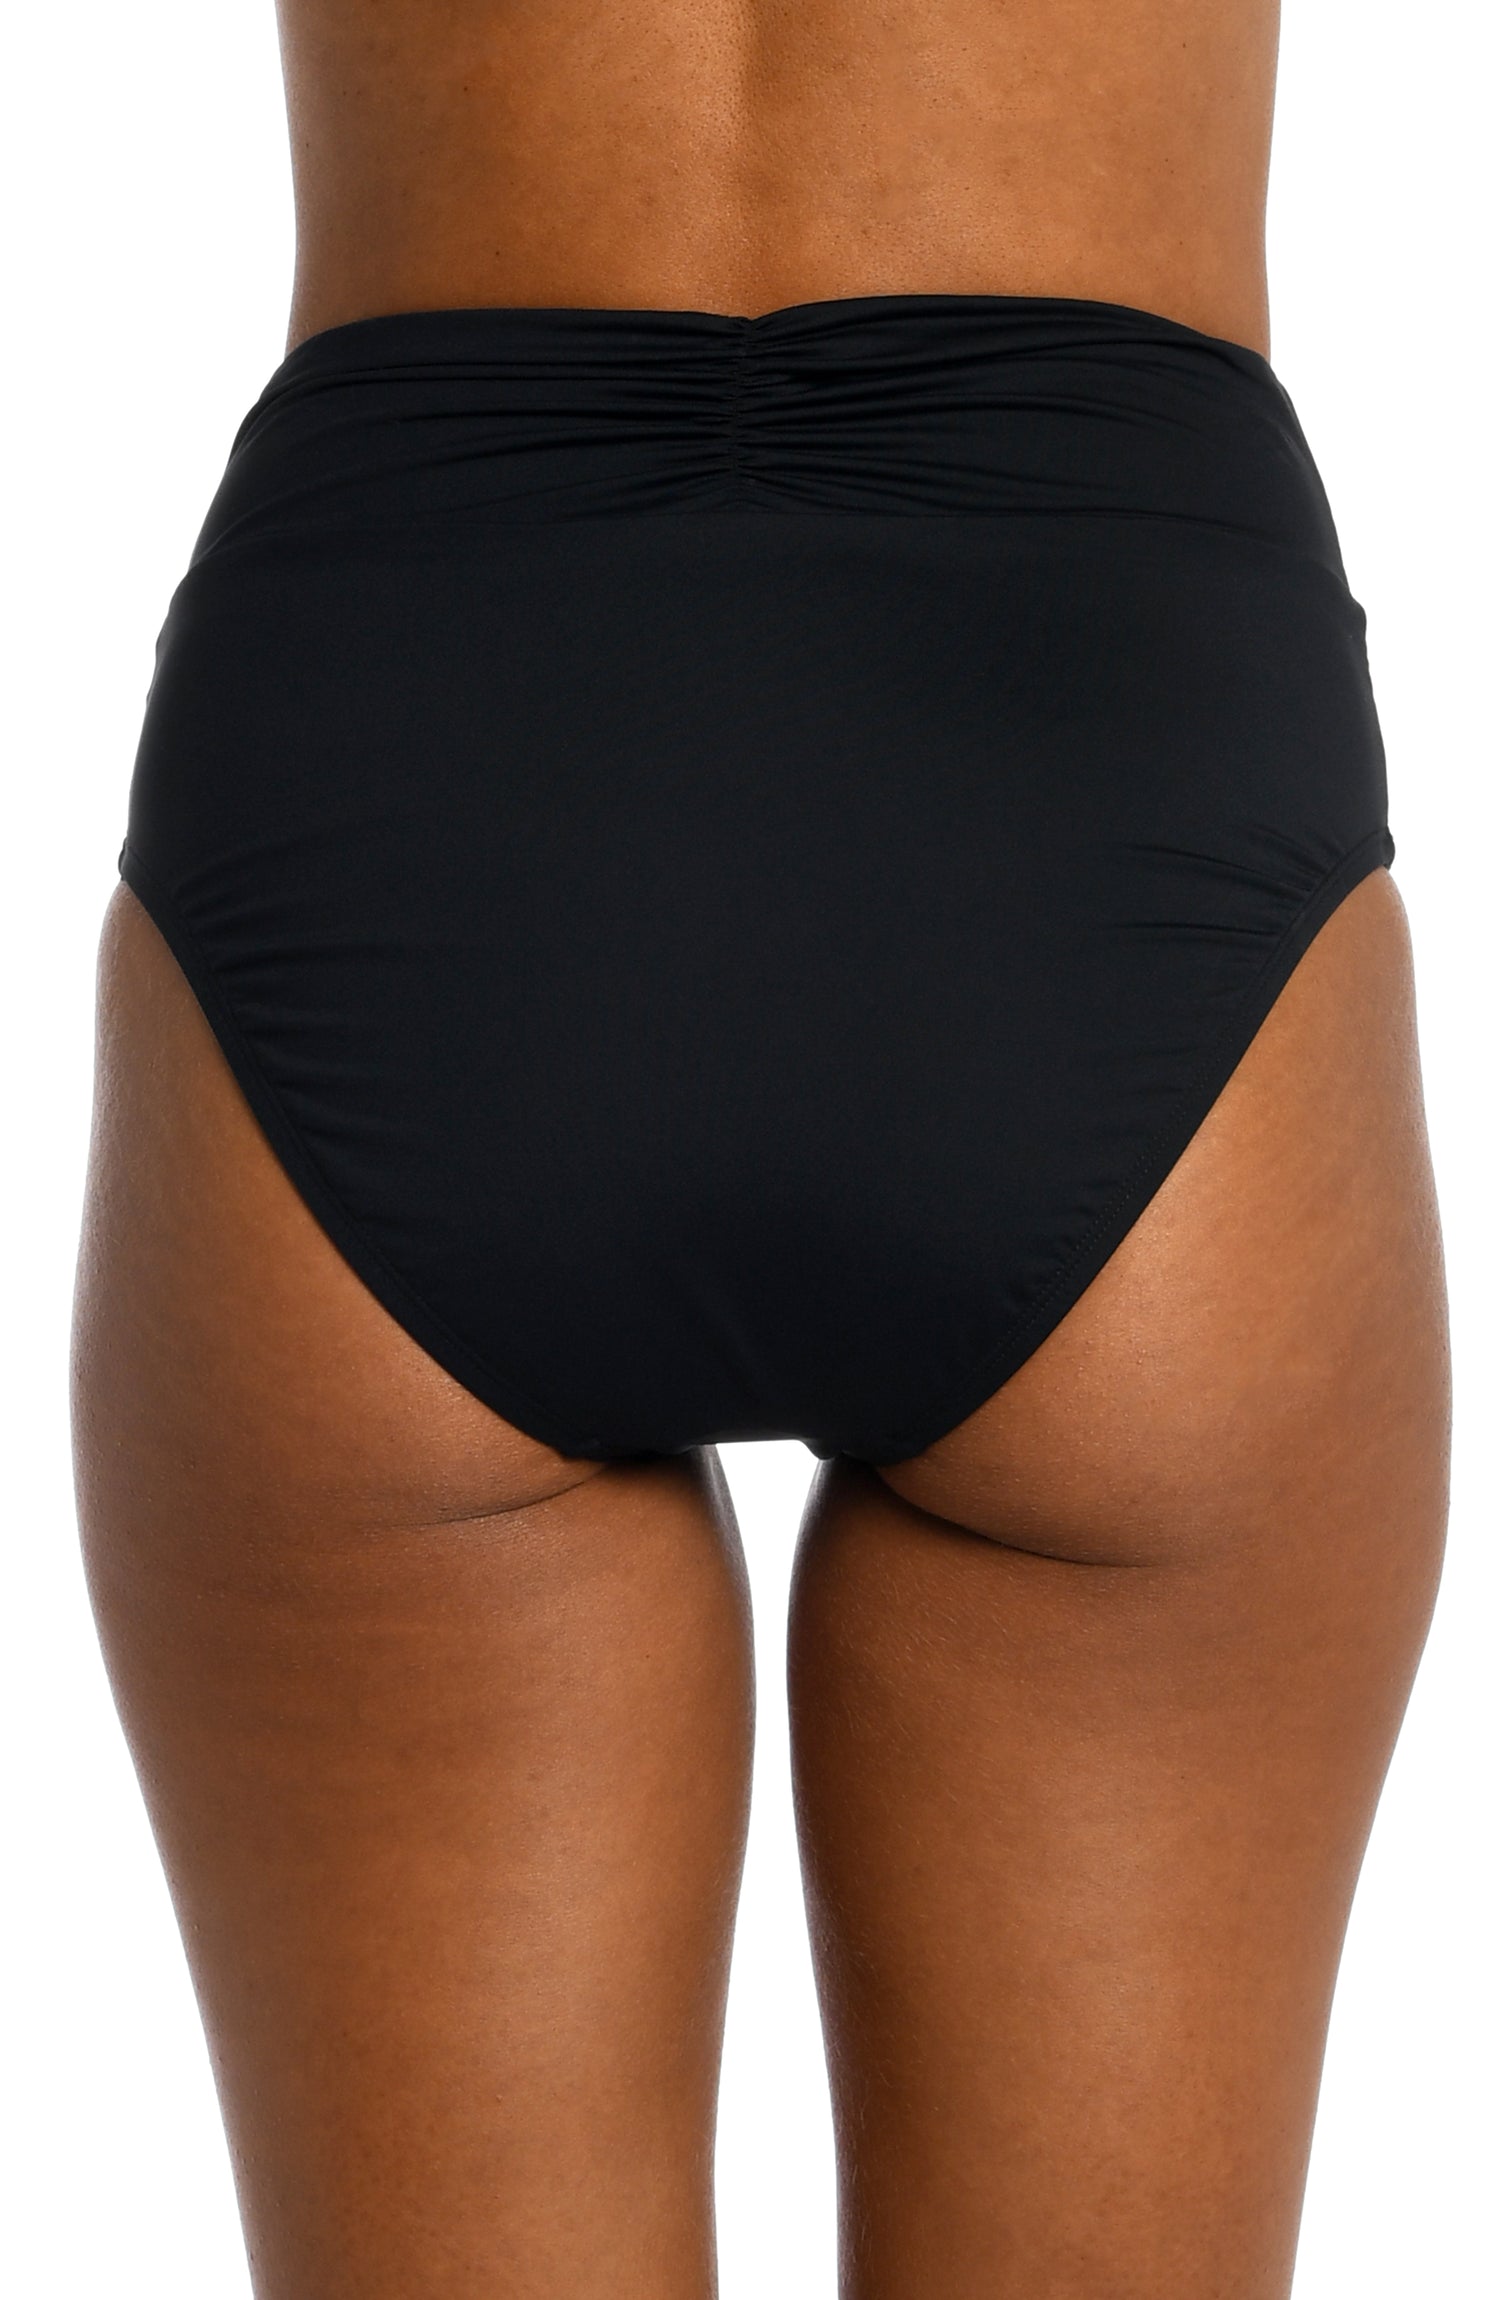 Model is wearing a black high waist swimsuit bottom from our Best-Selling Island Goddess collection.